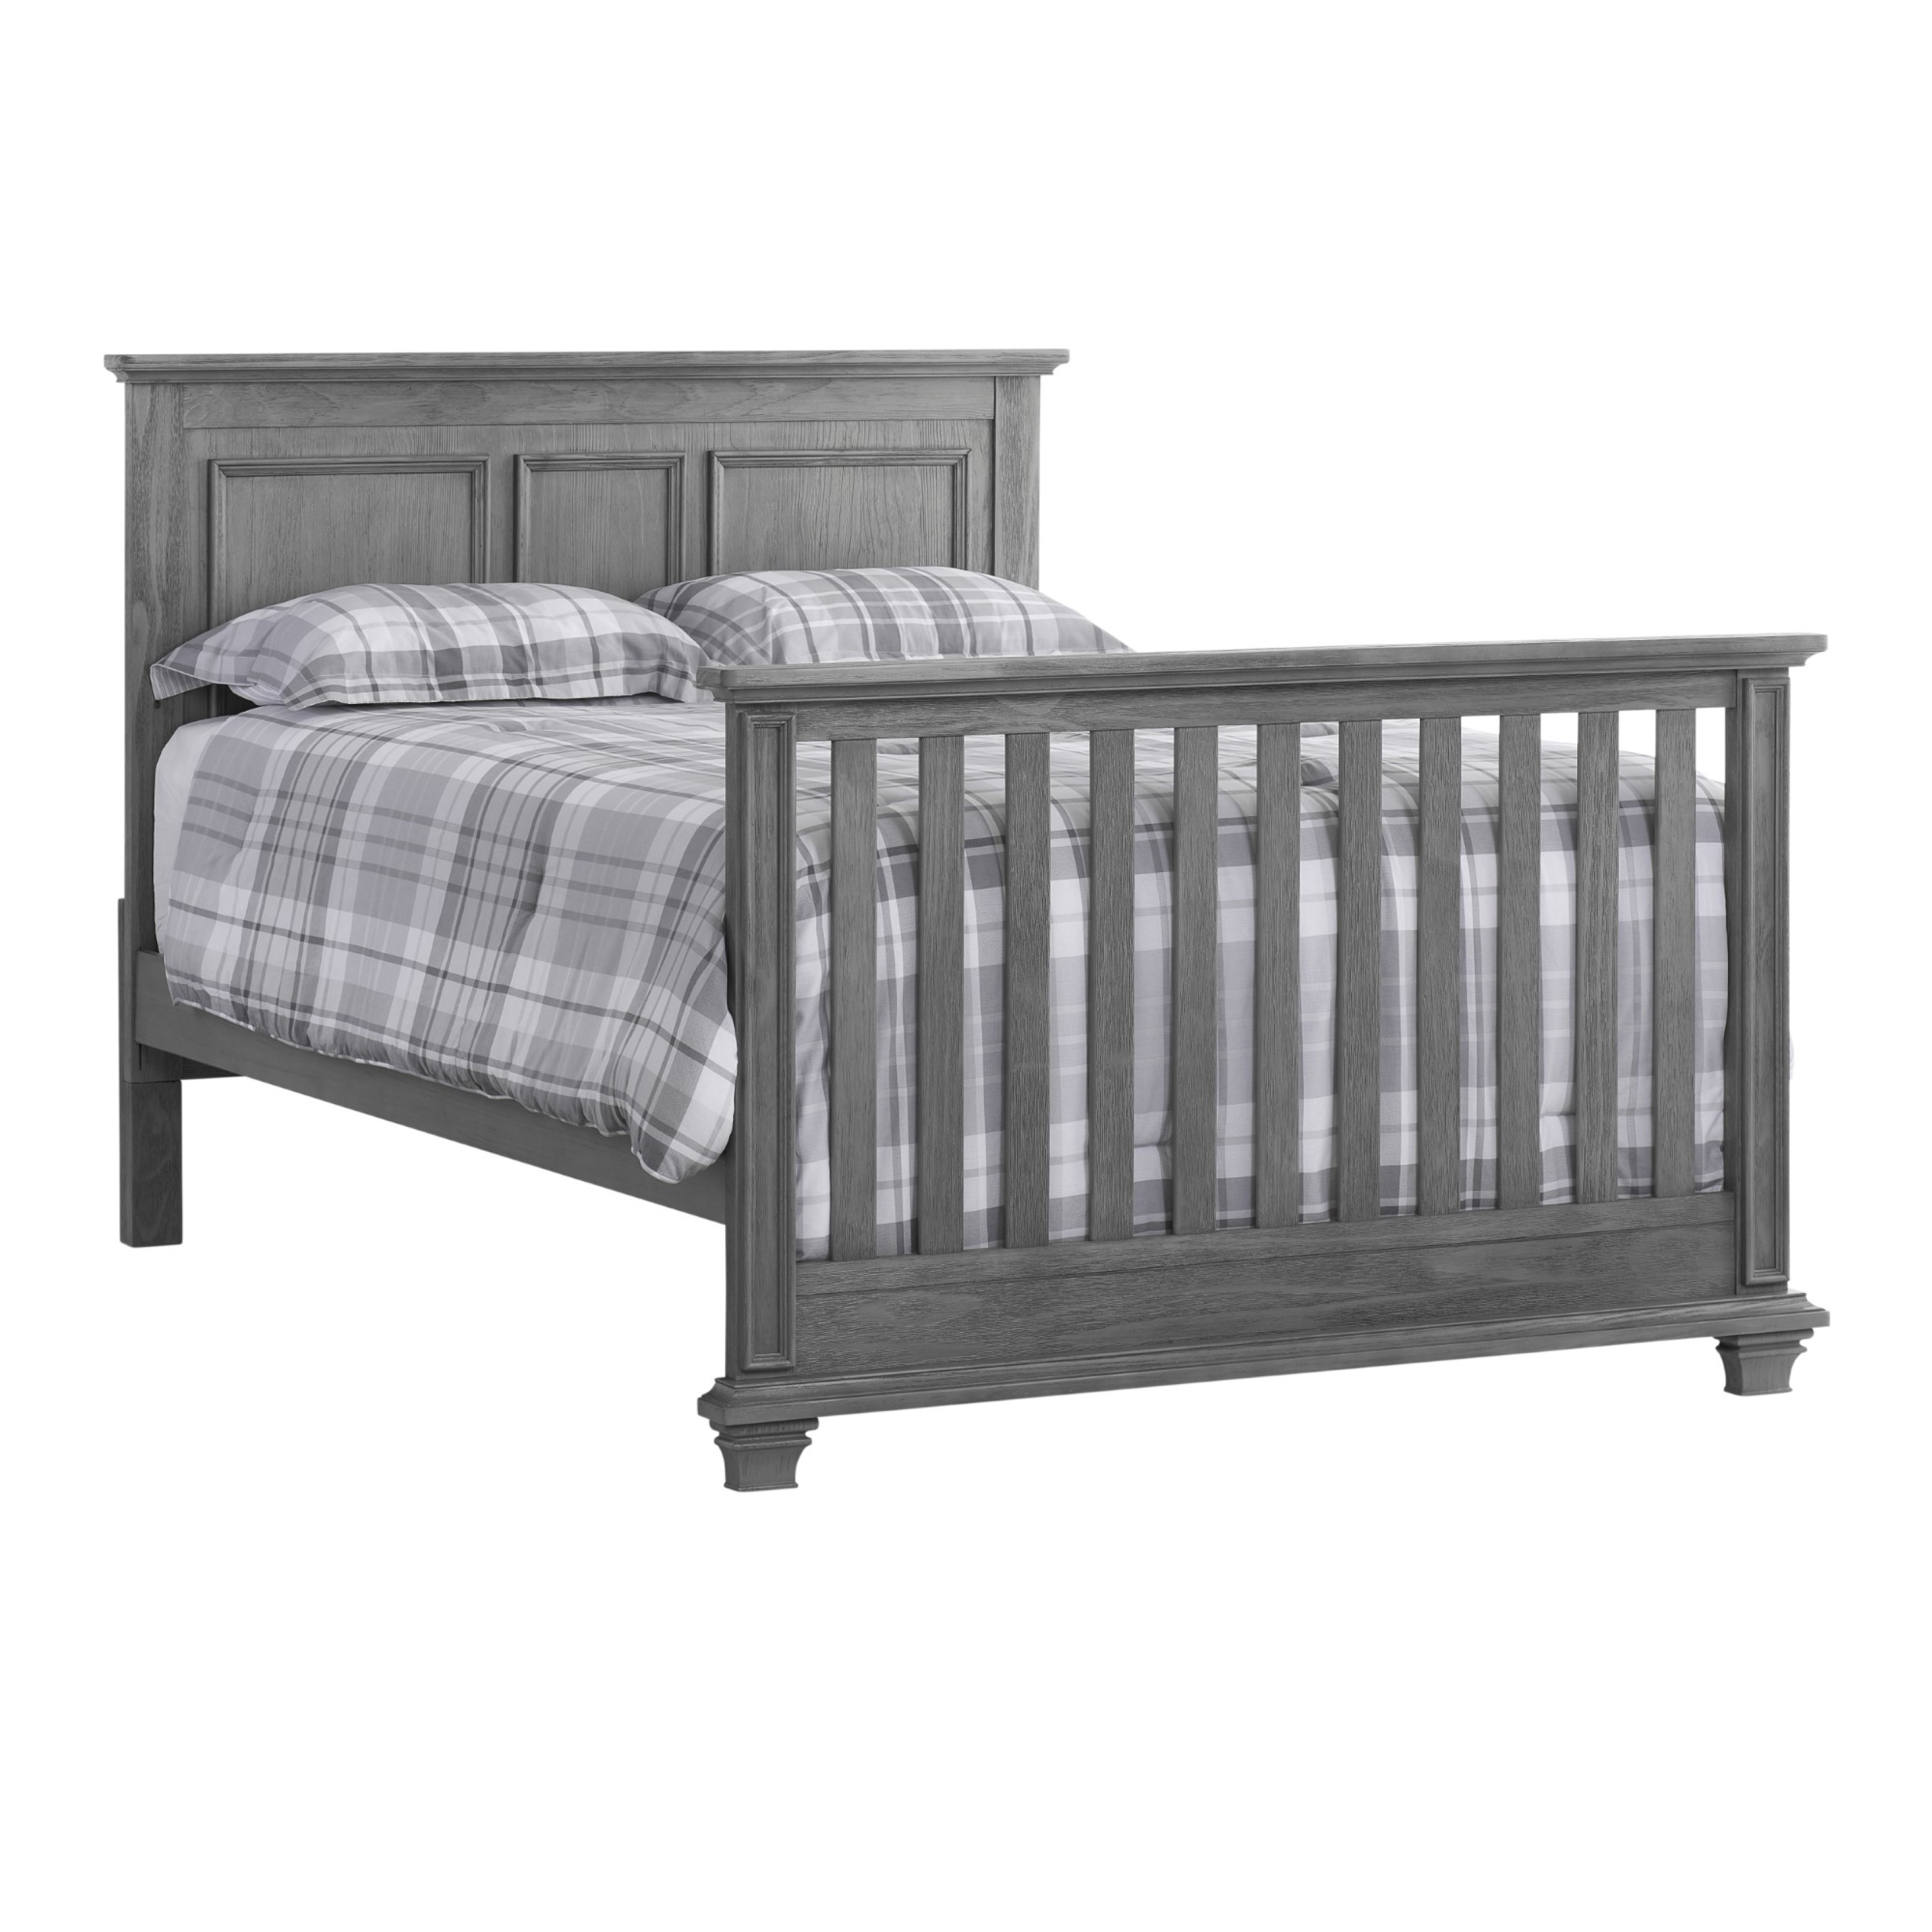 Oxford Baby Kenilworth 4-in-1 Convertible Crib, Graphite Gray, GREENGUARD Gold Certified, Wooden Crib - image 5 of 10